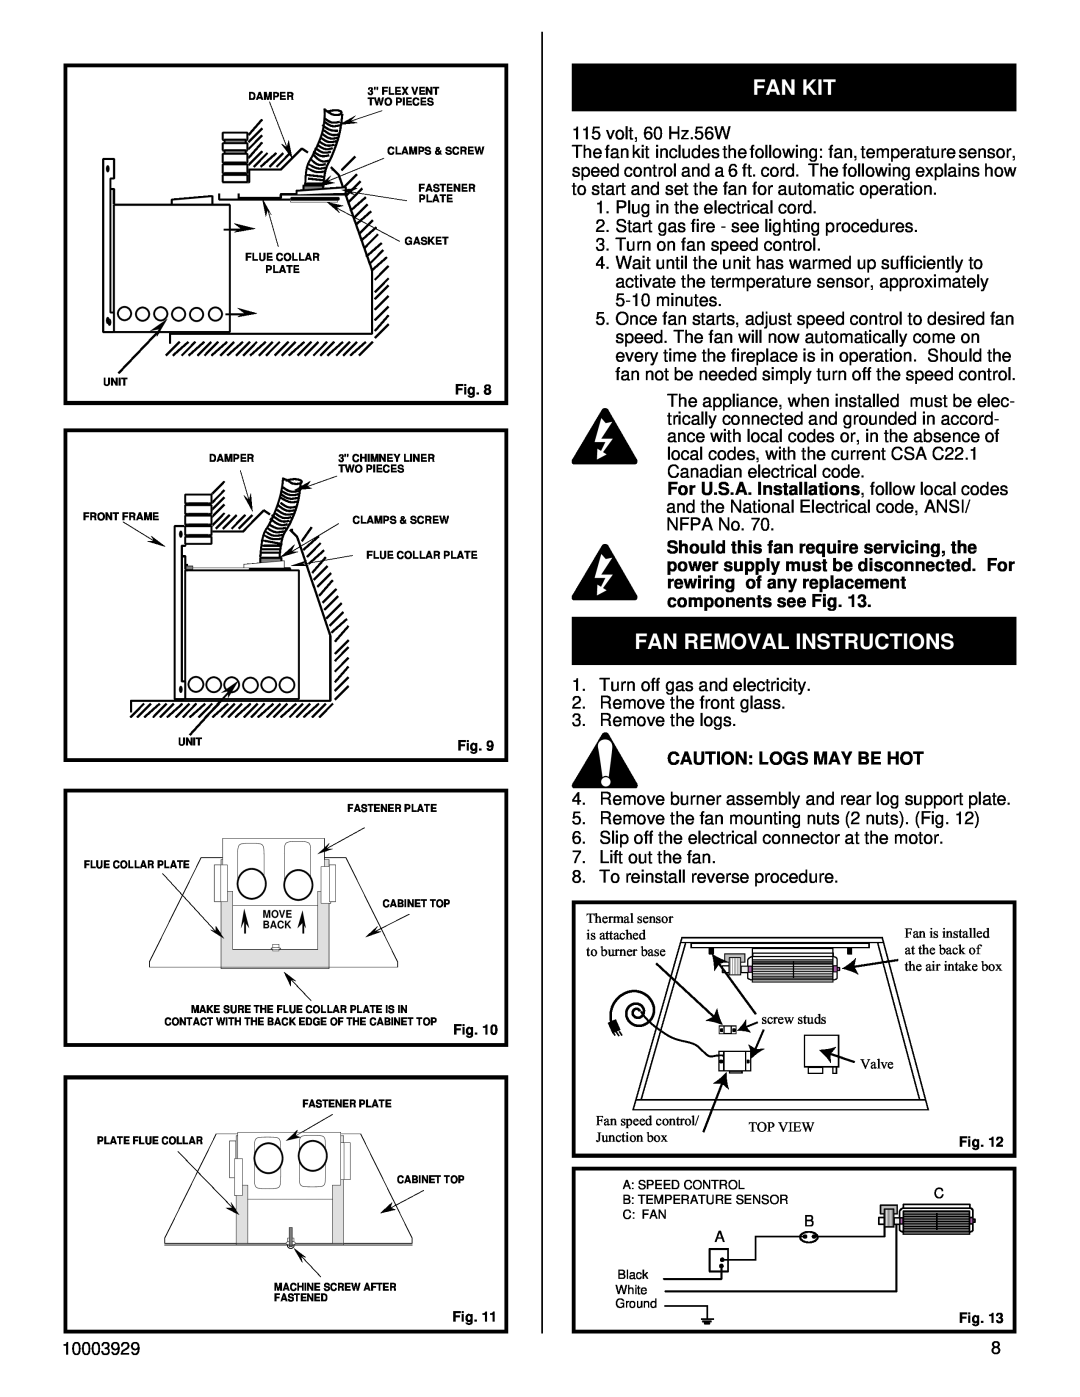 Vermont Casting IRHEDV32 installation instructions Fan Kit, Fan Removal Instructions, Caution Logs May Be Hot 